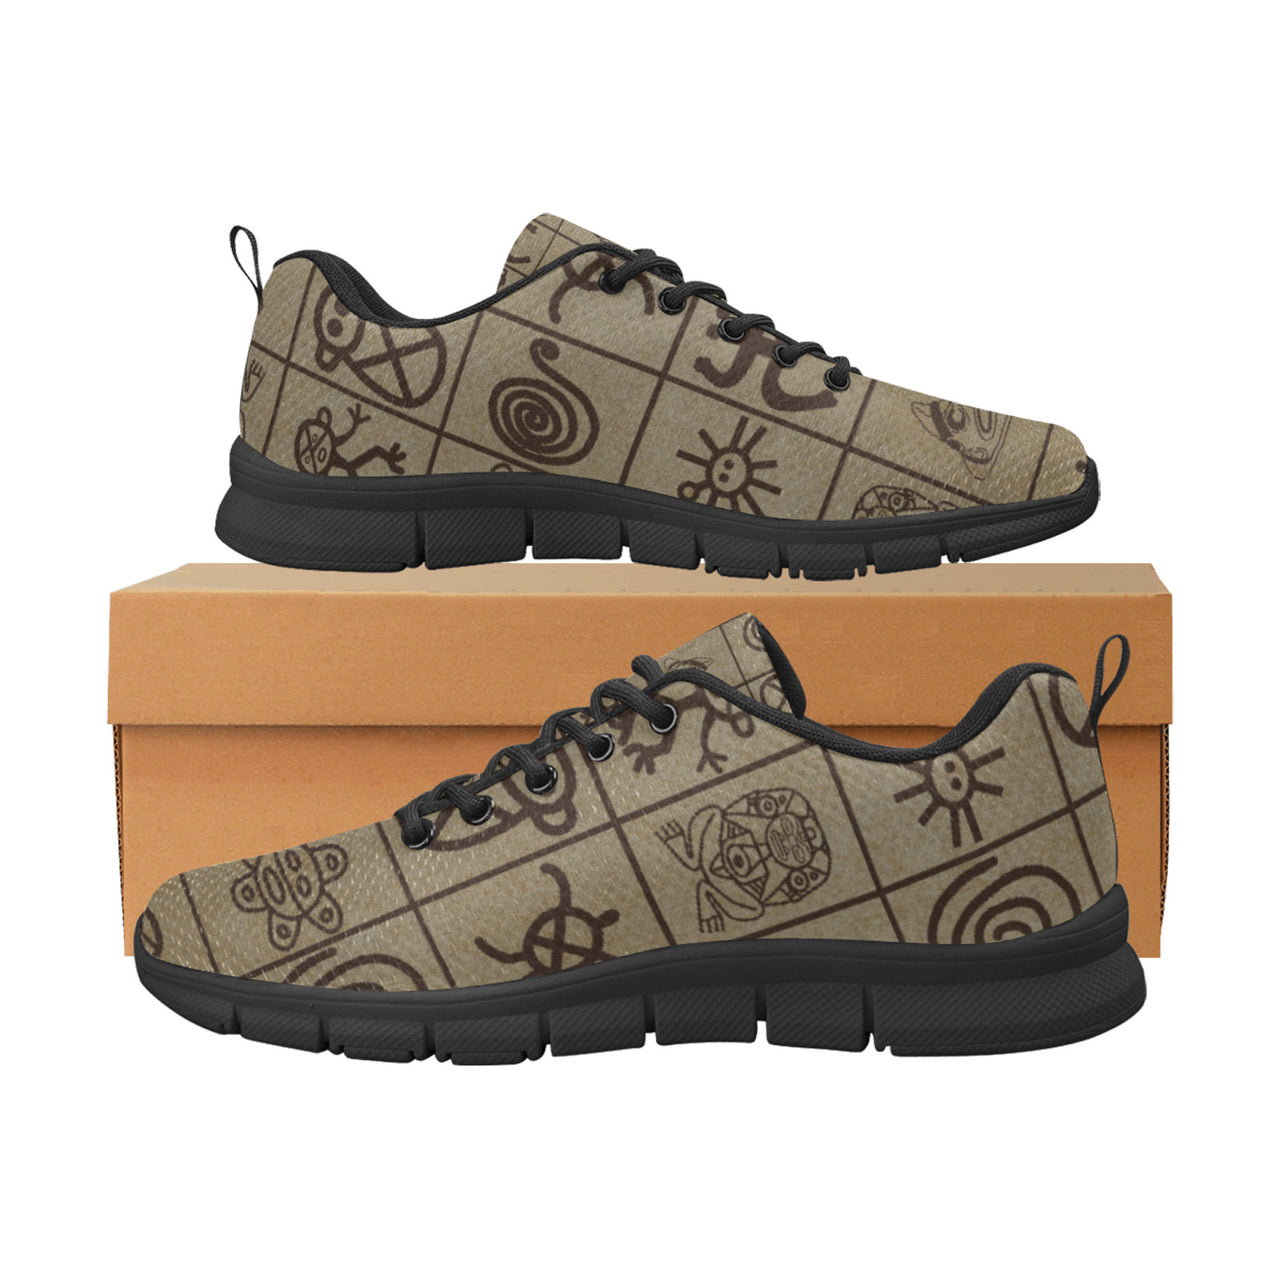 Taino Symbol Women's Breathable Sneakers